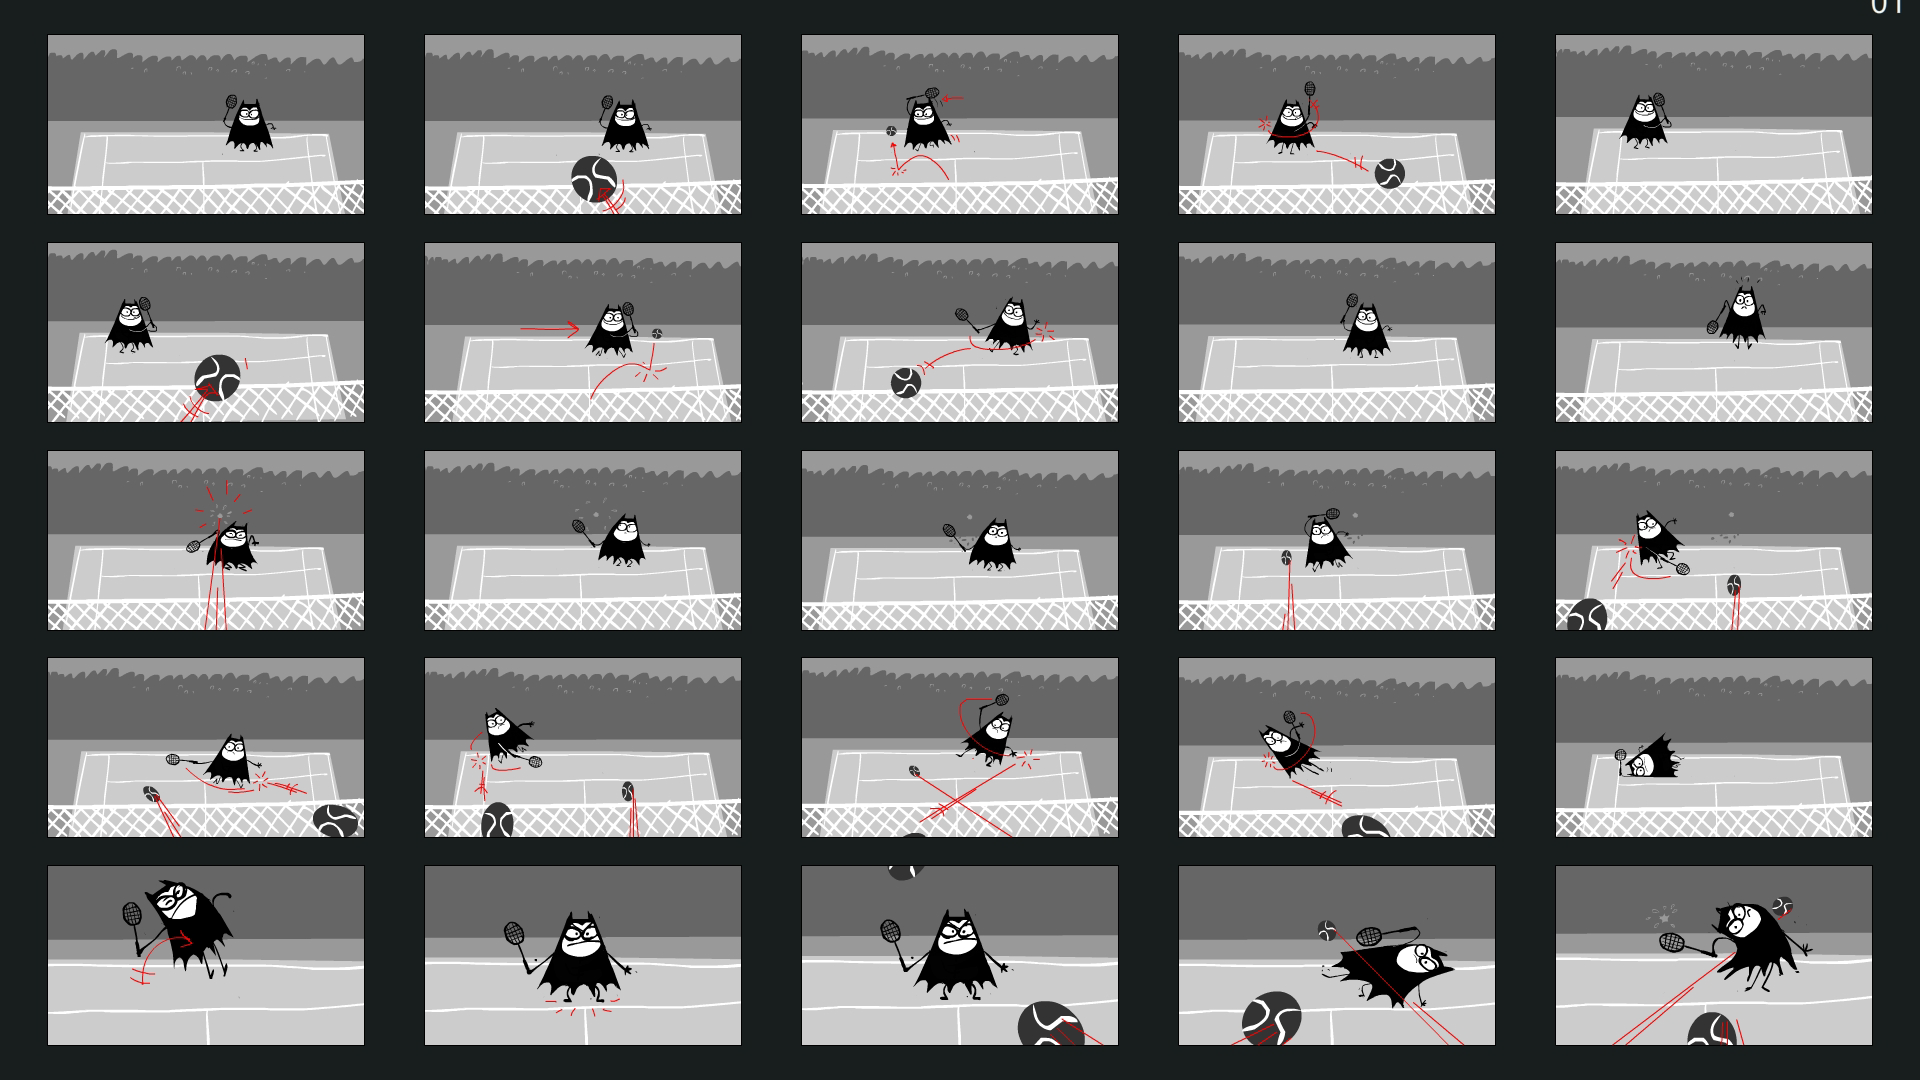 MikeOwens_STORYBOARDS_LilBat_Tennis_Page_1.png